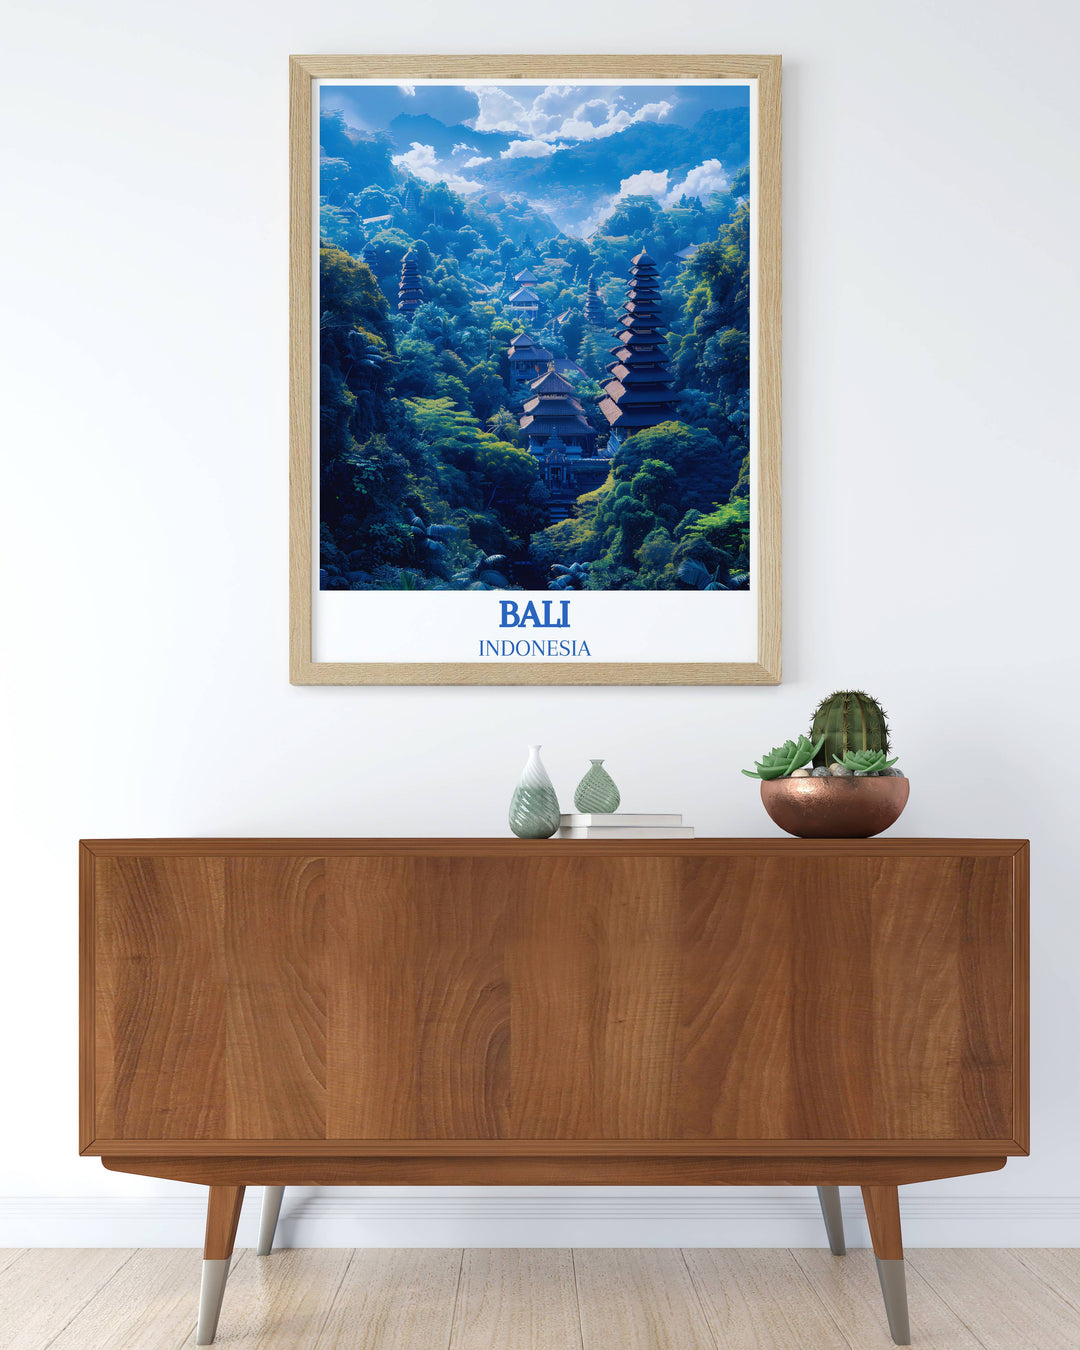 Ubud Monkey Forest poster in vibrant colors, bringing the lively atmosphere of this Balinese sanctuary to your home or office.